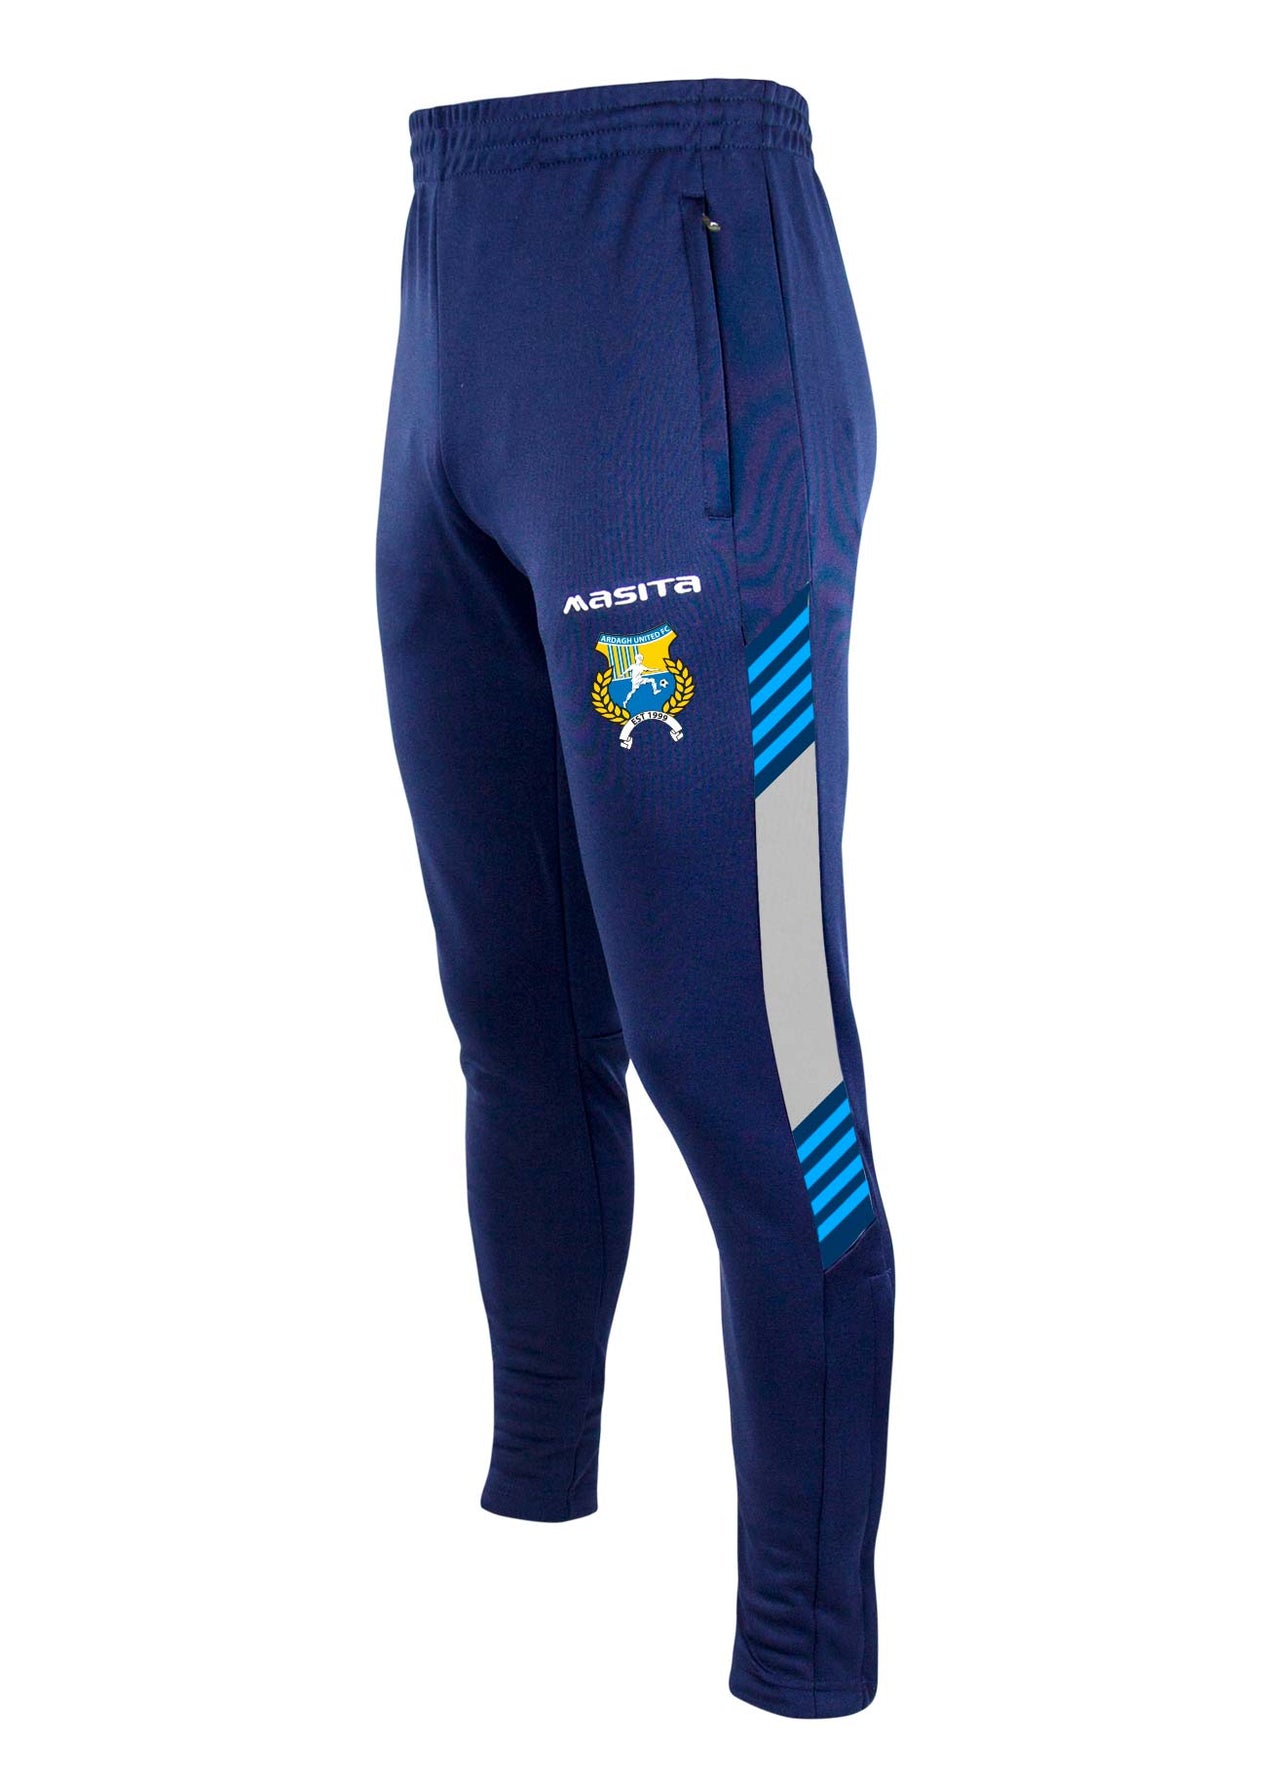 Ardagh United FC Hydro Style Skinny Bottoms Adults